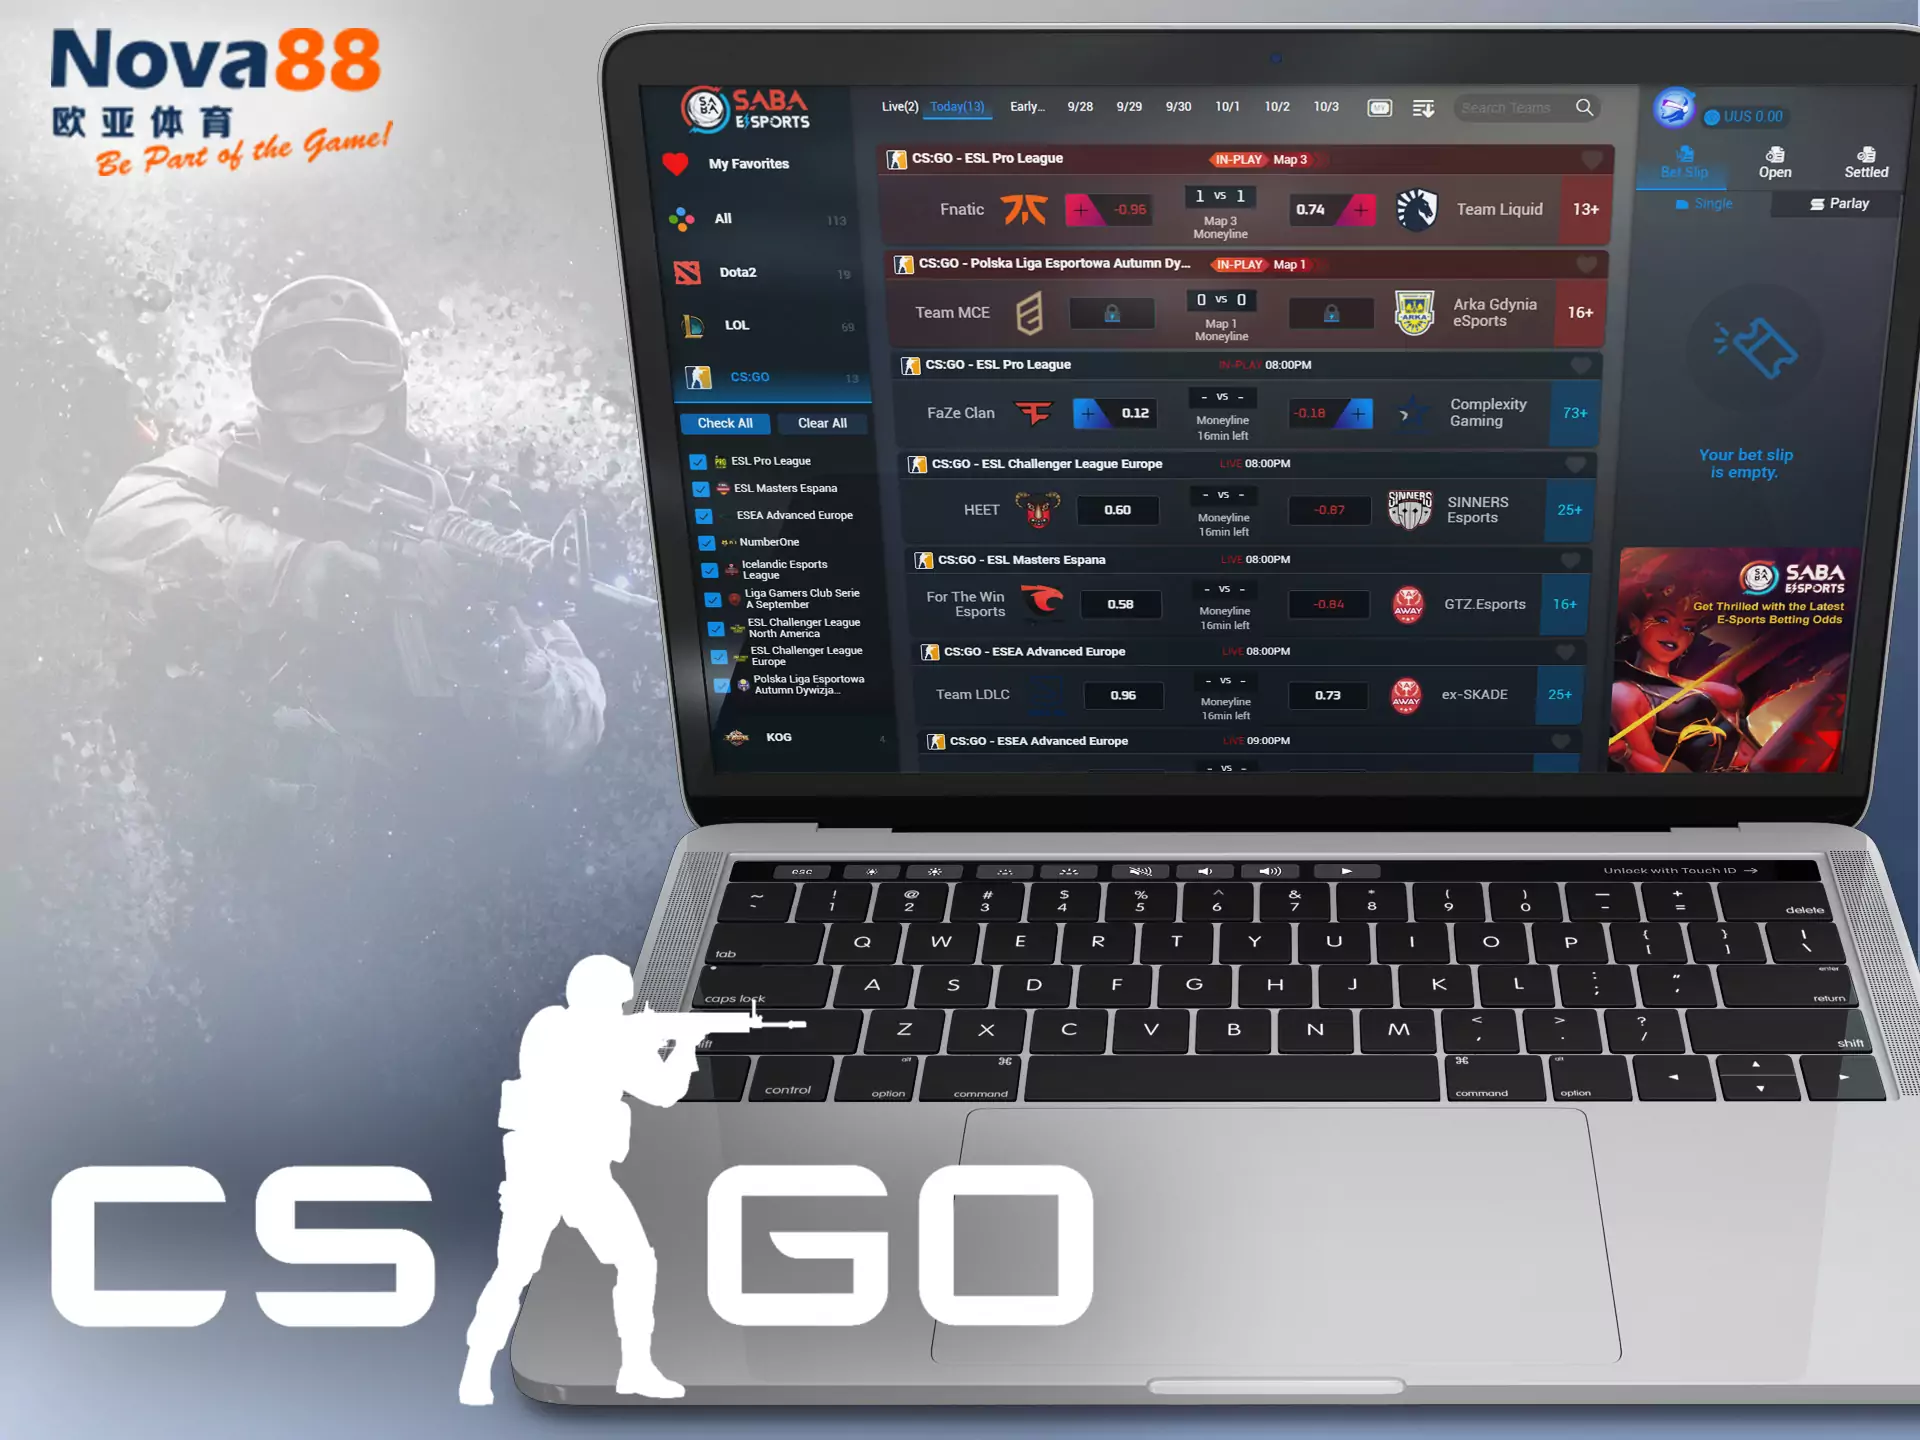 In the Nova88 sportsbook, you find CS:GO events available for placing bets.